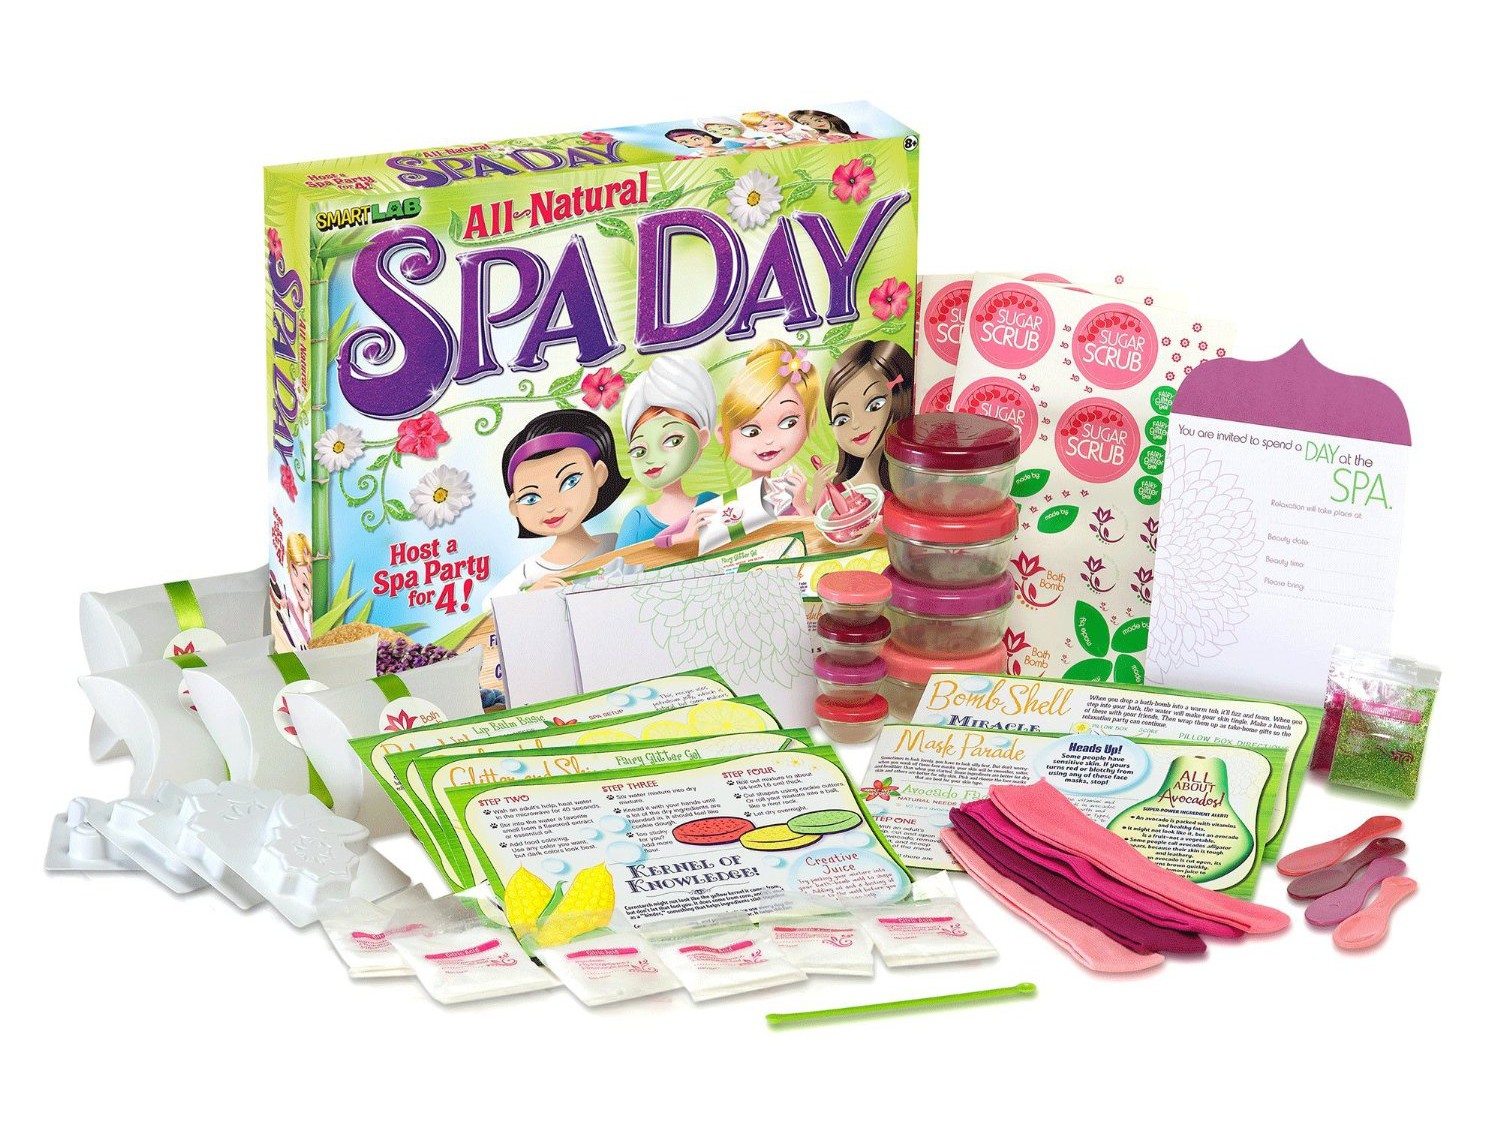 The Best of Amazon Mom Picks for Holiday Gifts: SmartLab Toys All Natural Spa Day | RegistryFinder.com